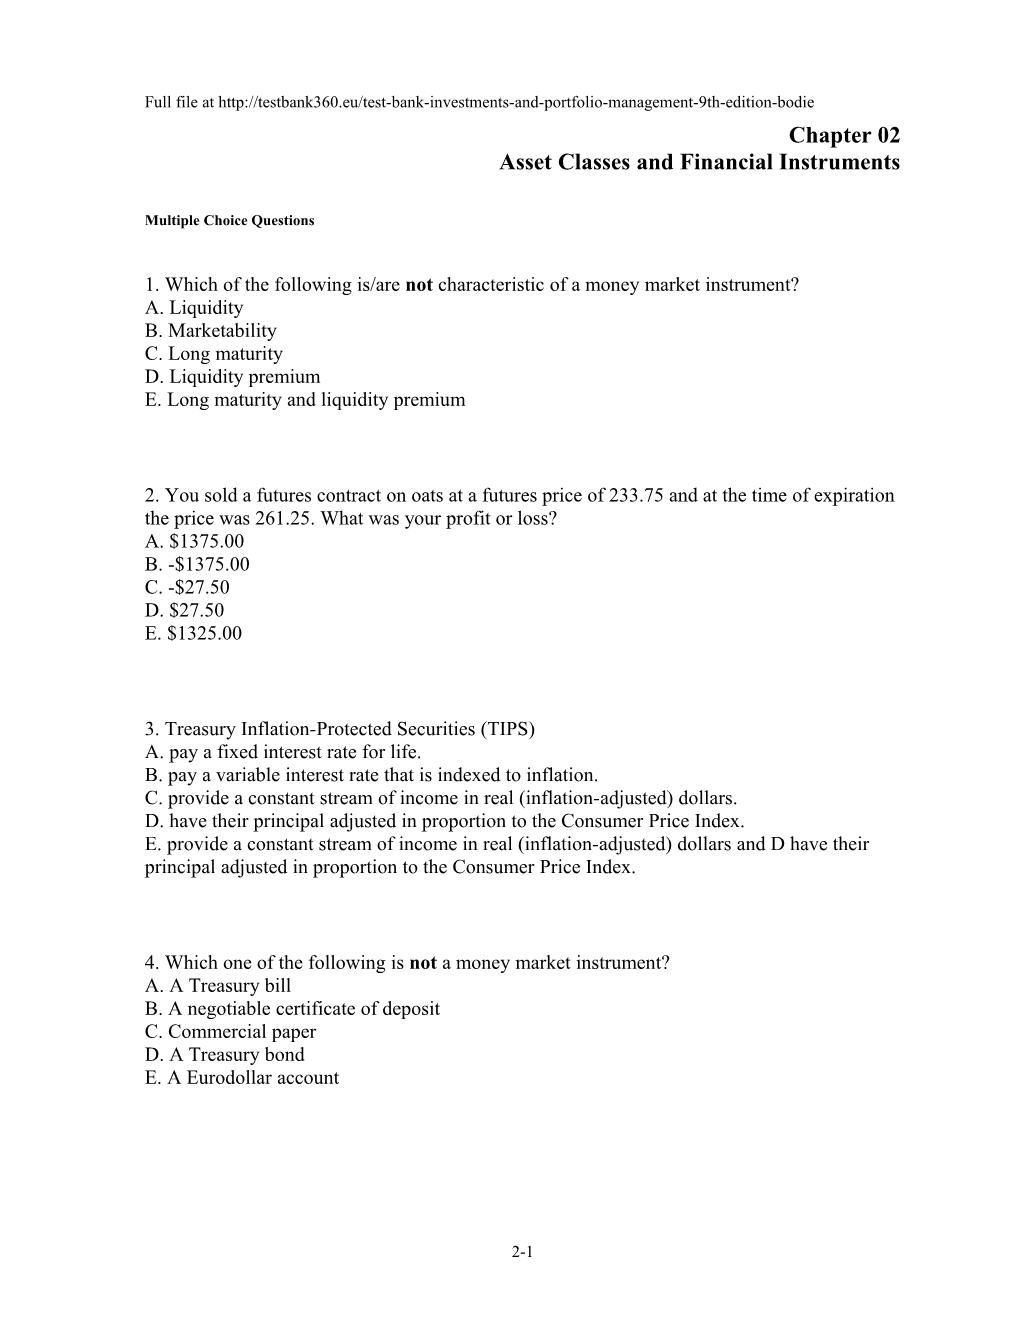 Chapter 02 Asset Classes and Financial Instruments s1